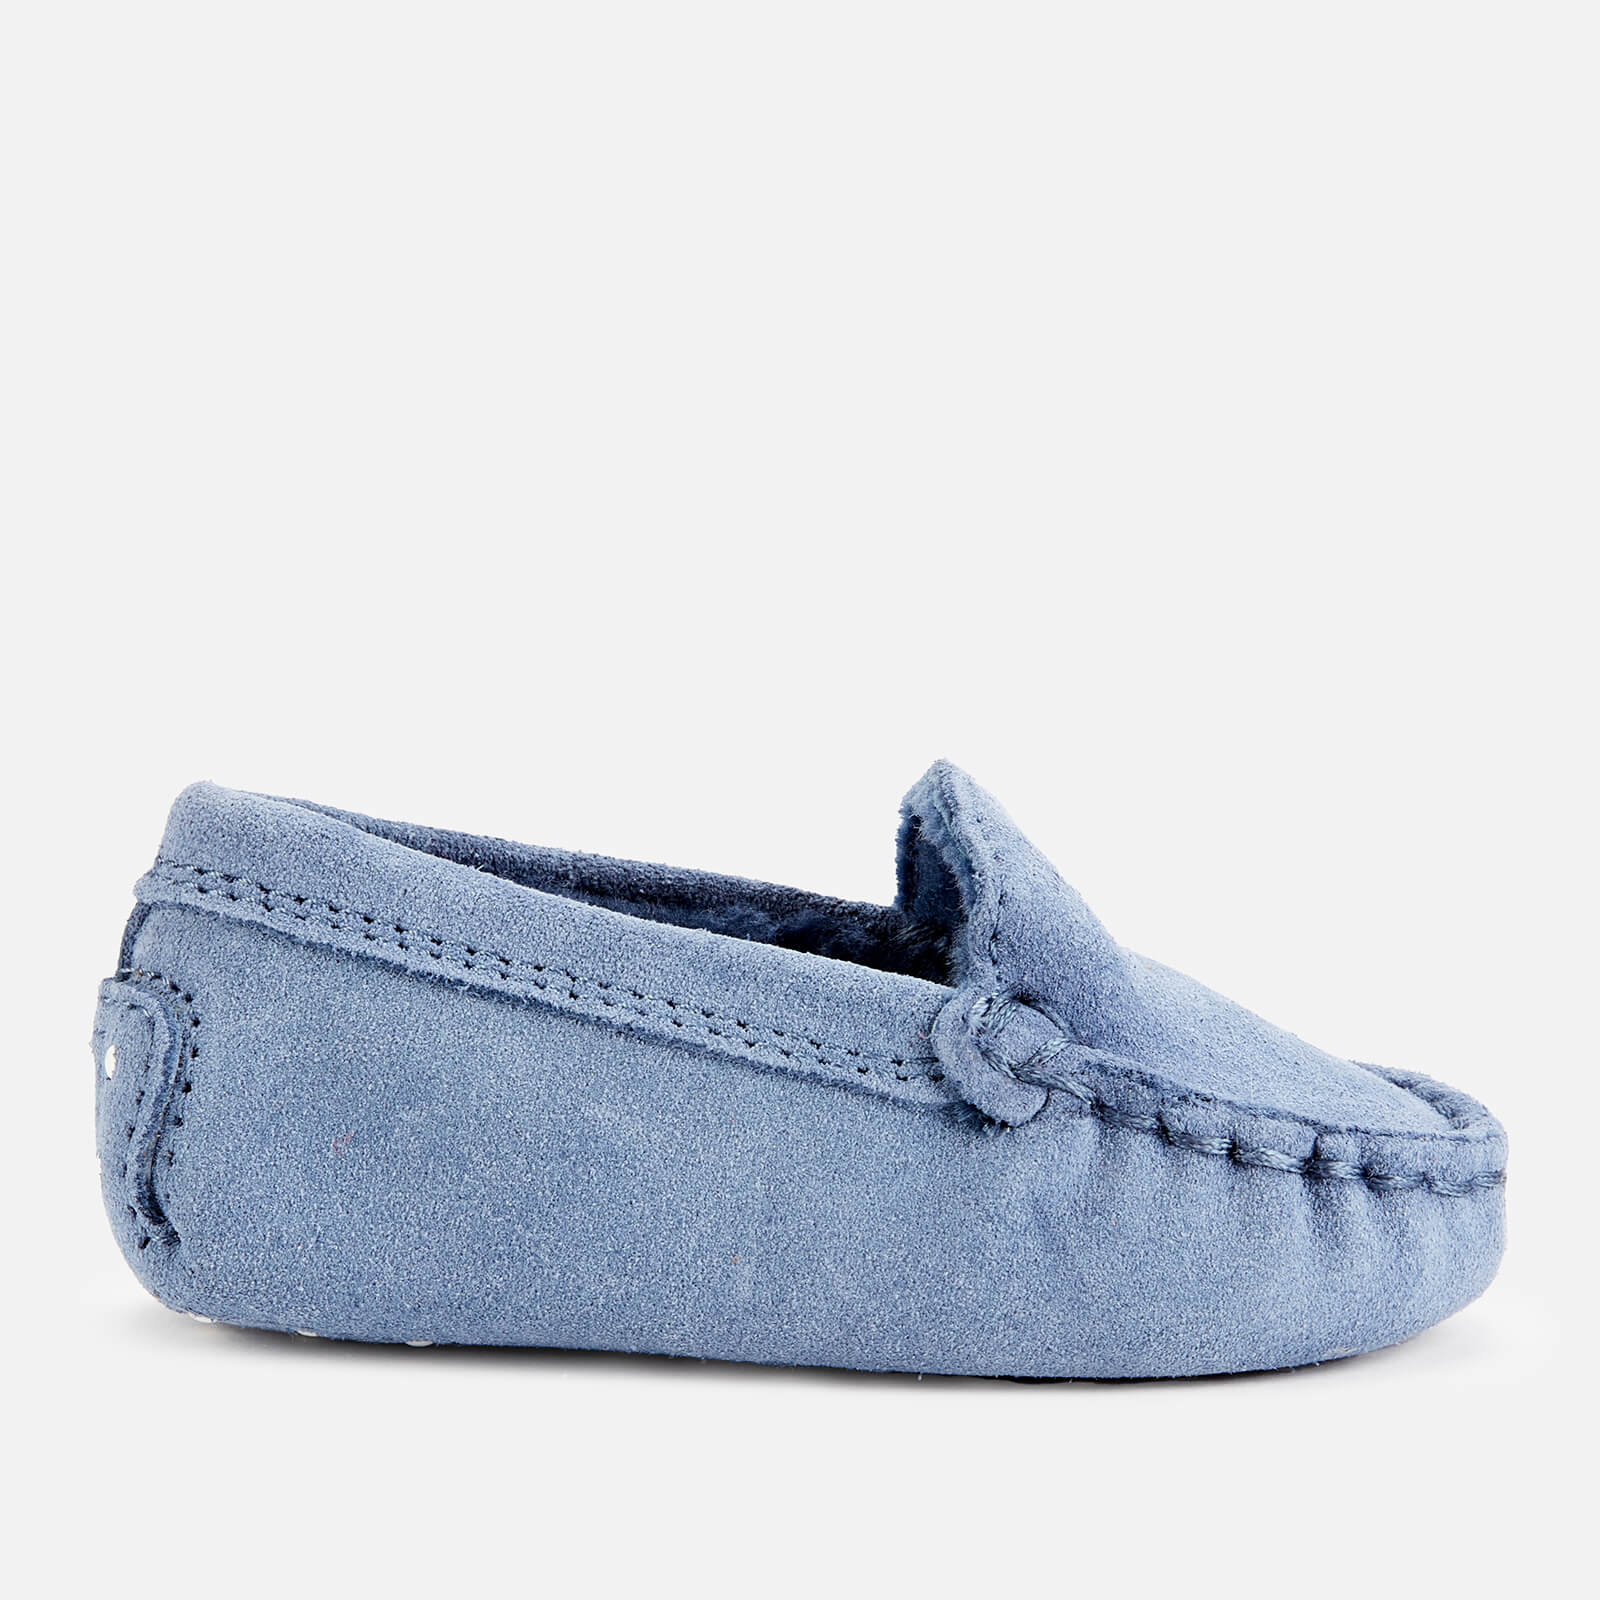 Tods Babys' Suede Moccasin Loafers - Mitro - UK 1 Baby